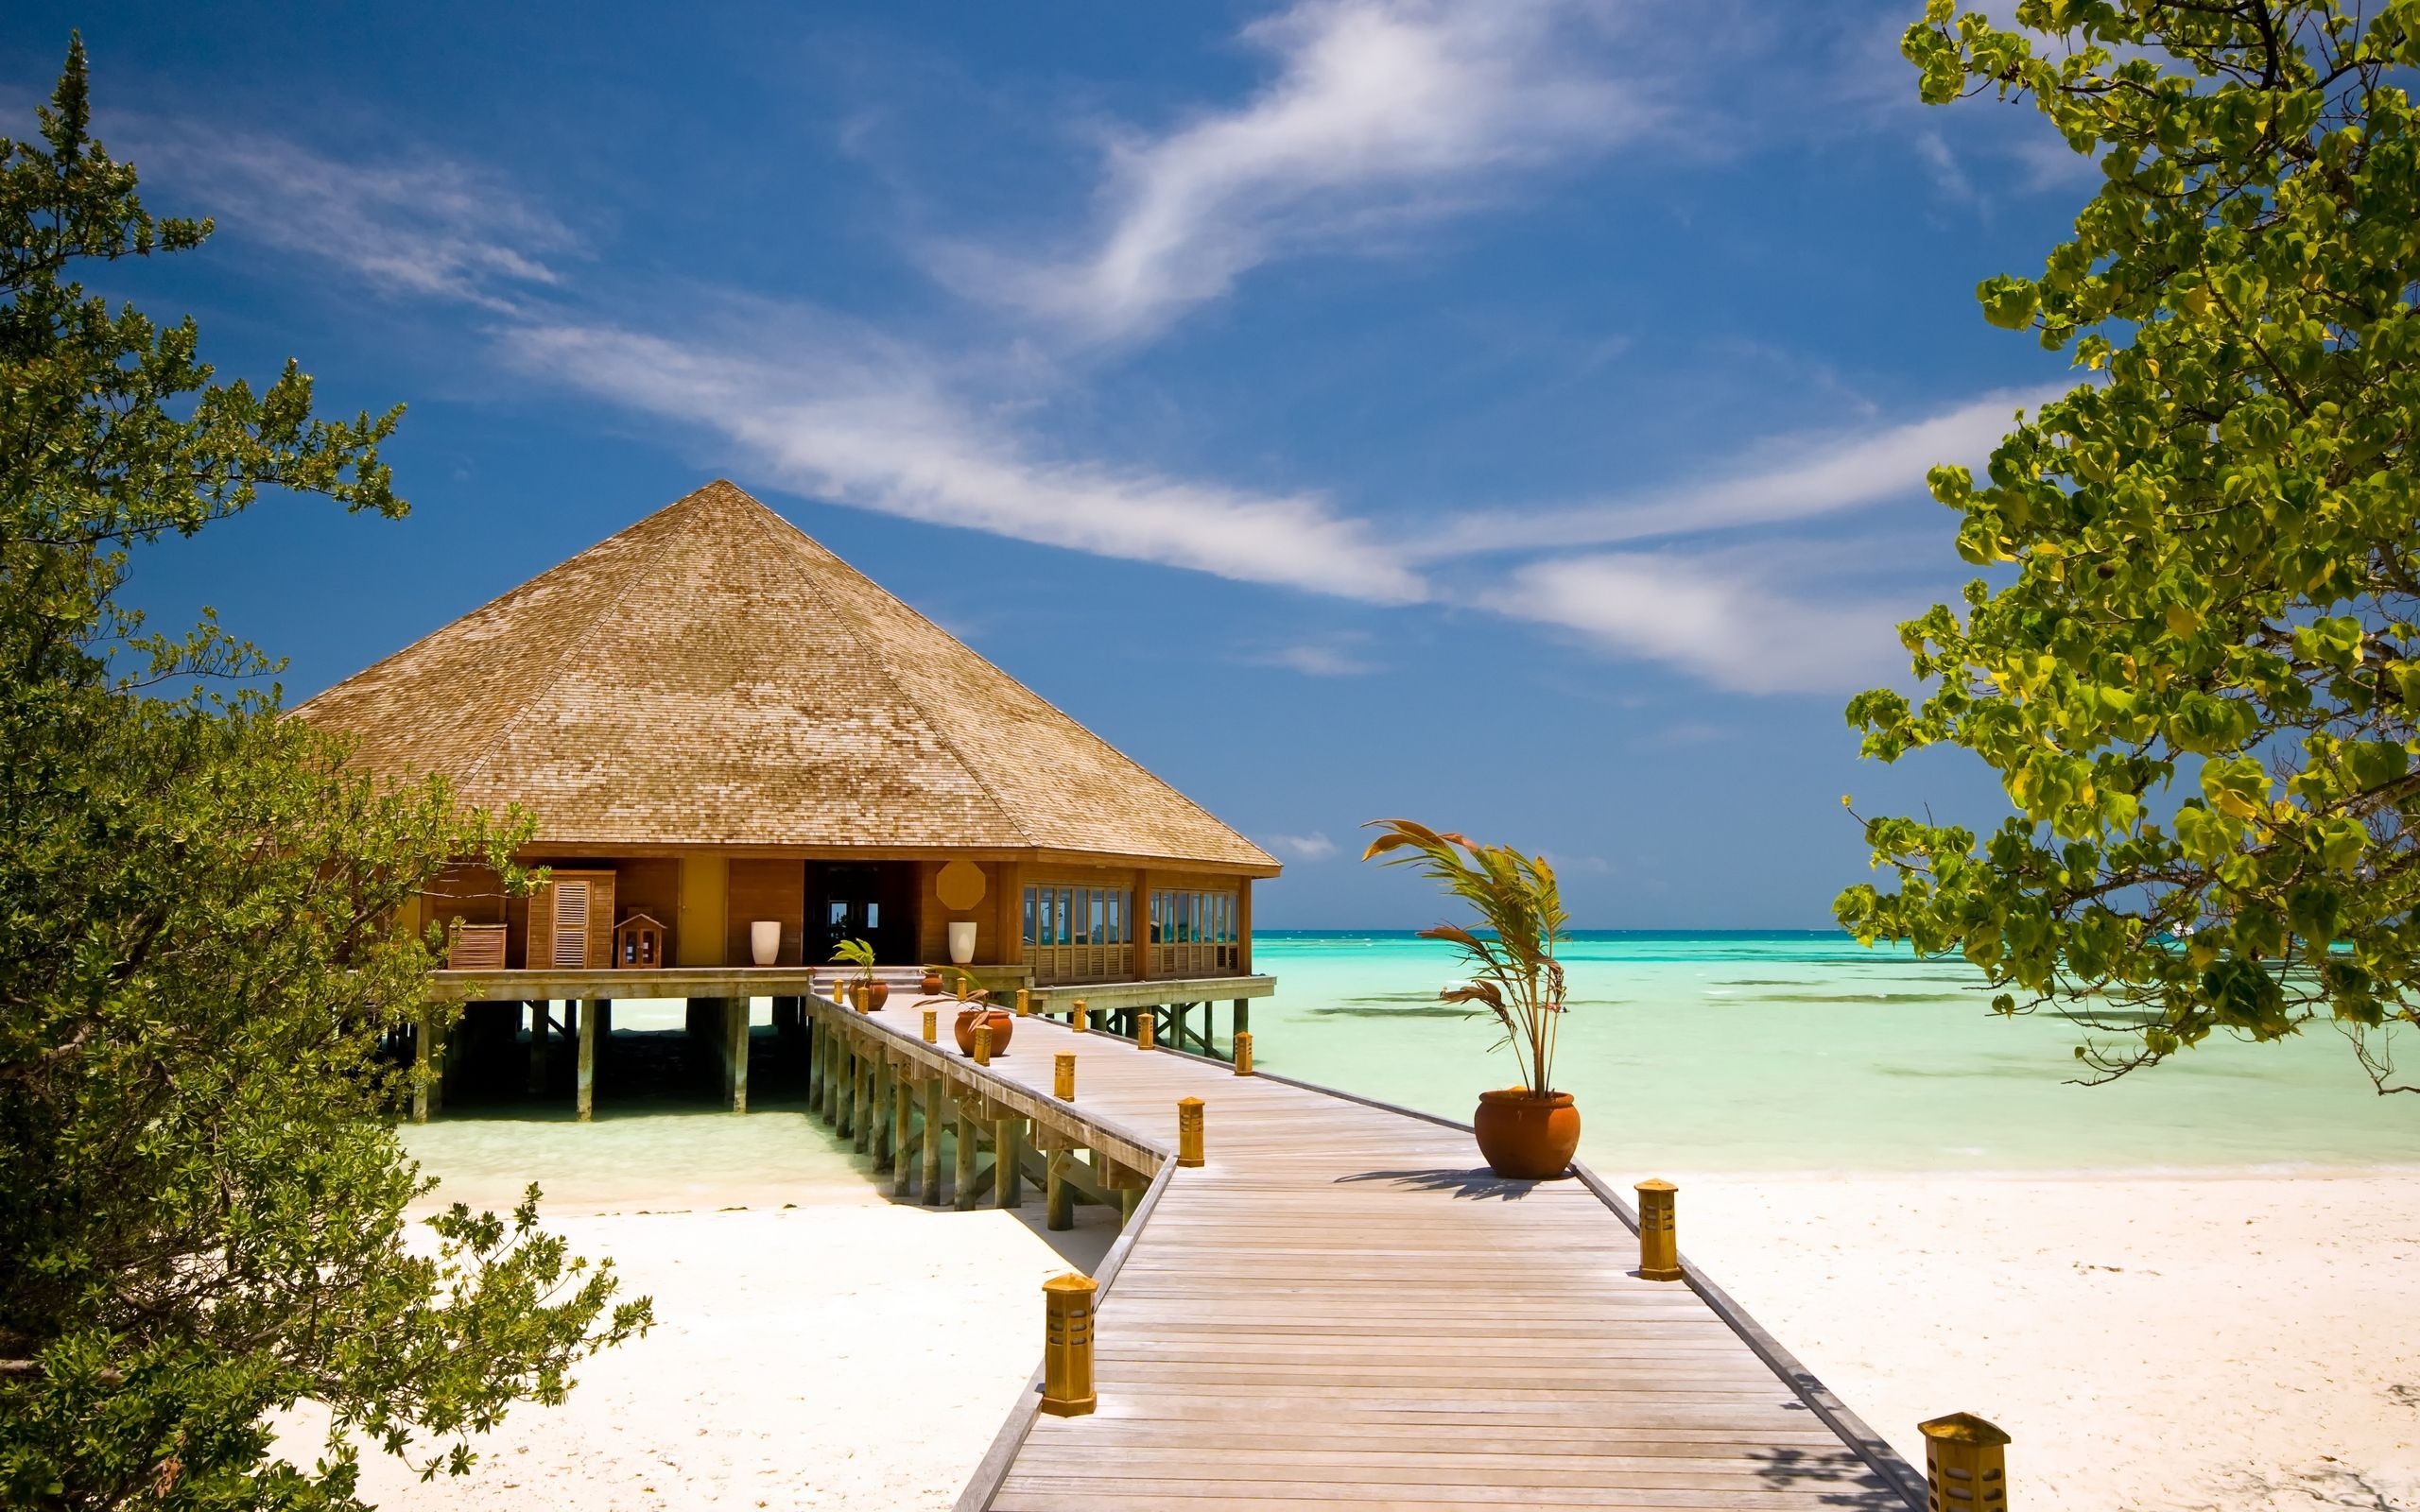 Dream Summer 2012 - peaceful place Wallpapers - HD Wallpapers 96317